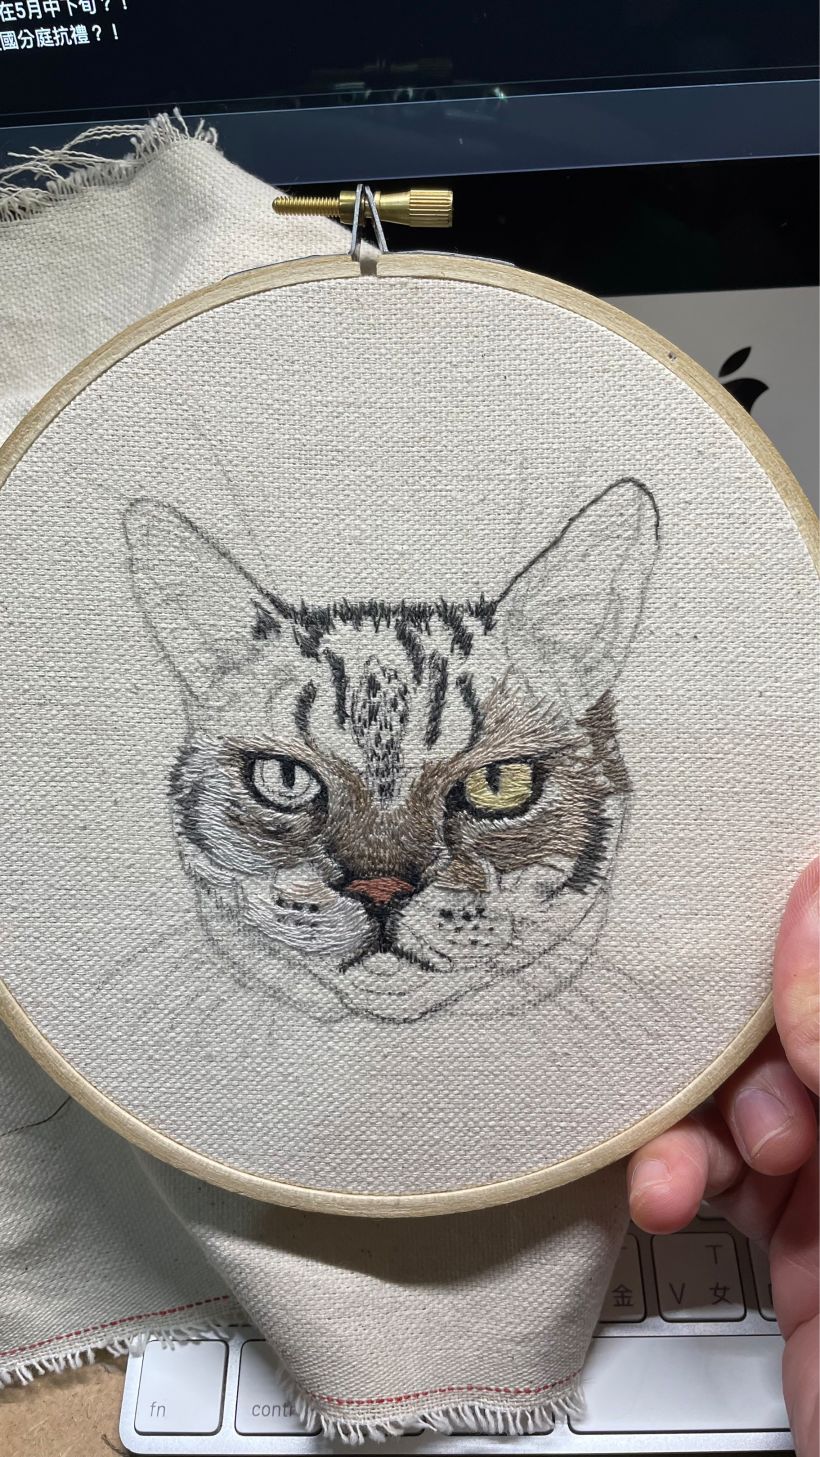 My project for course: Realistic Embroidery Techniques 2